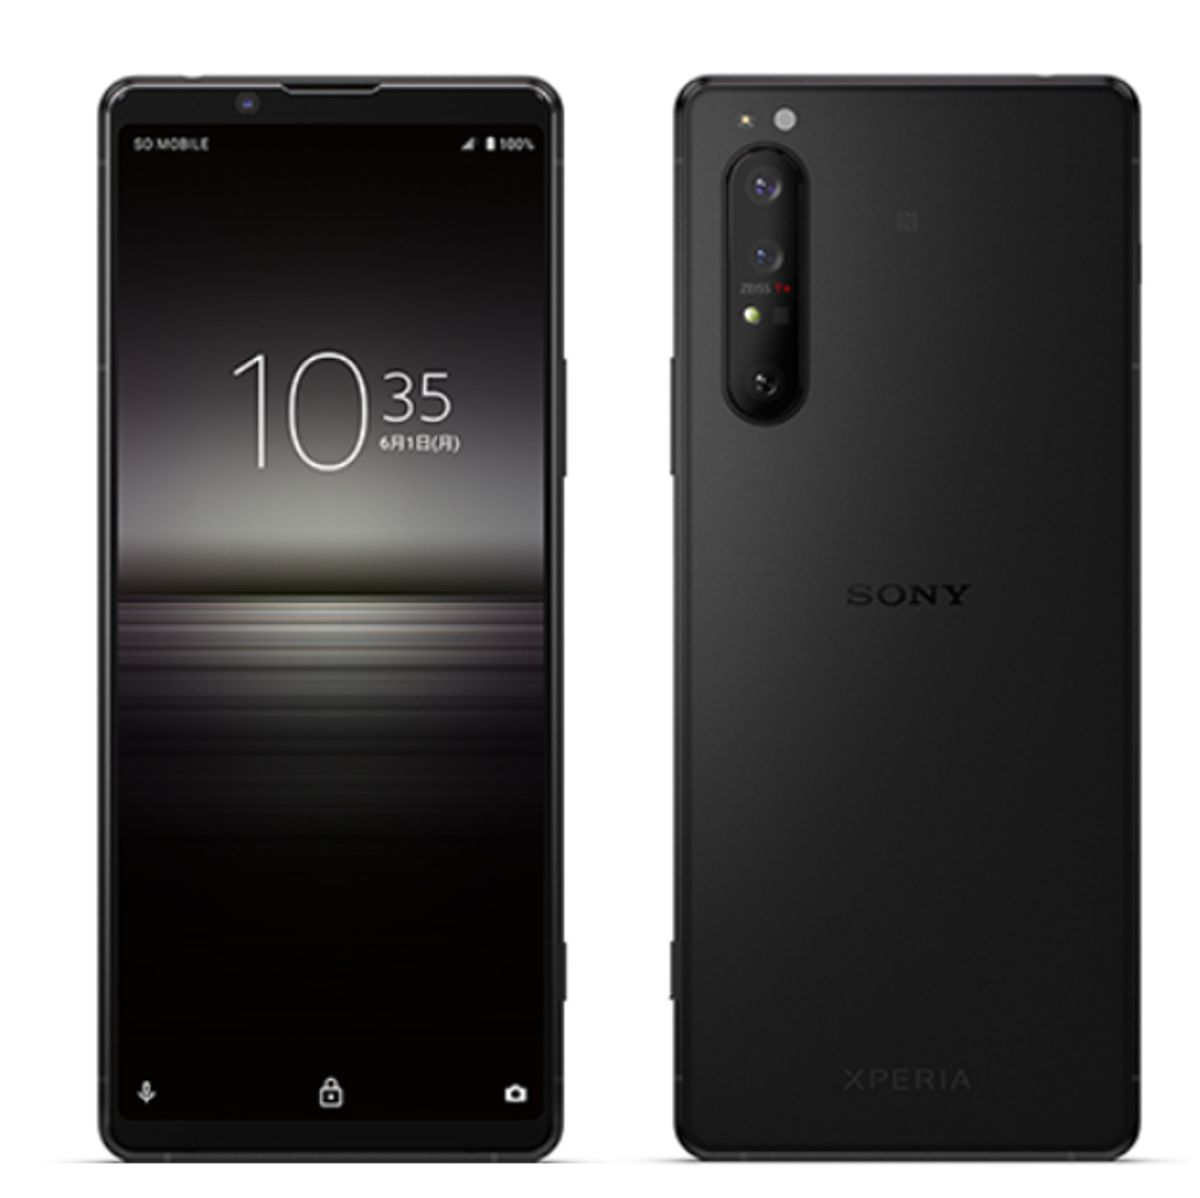 New Xperia 1 II with 12GB RAM and Frosted Black colour to launch